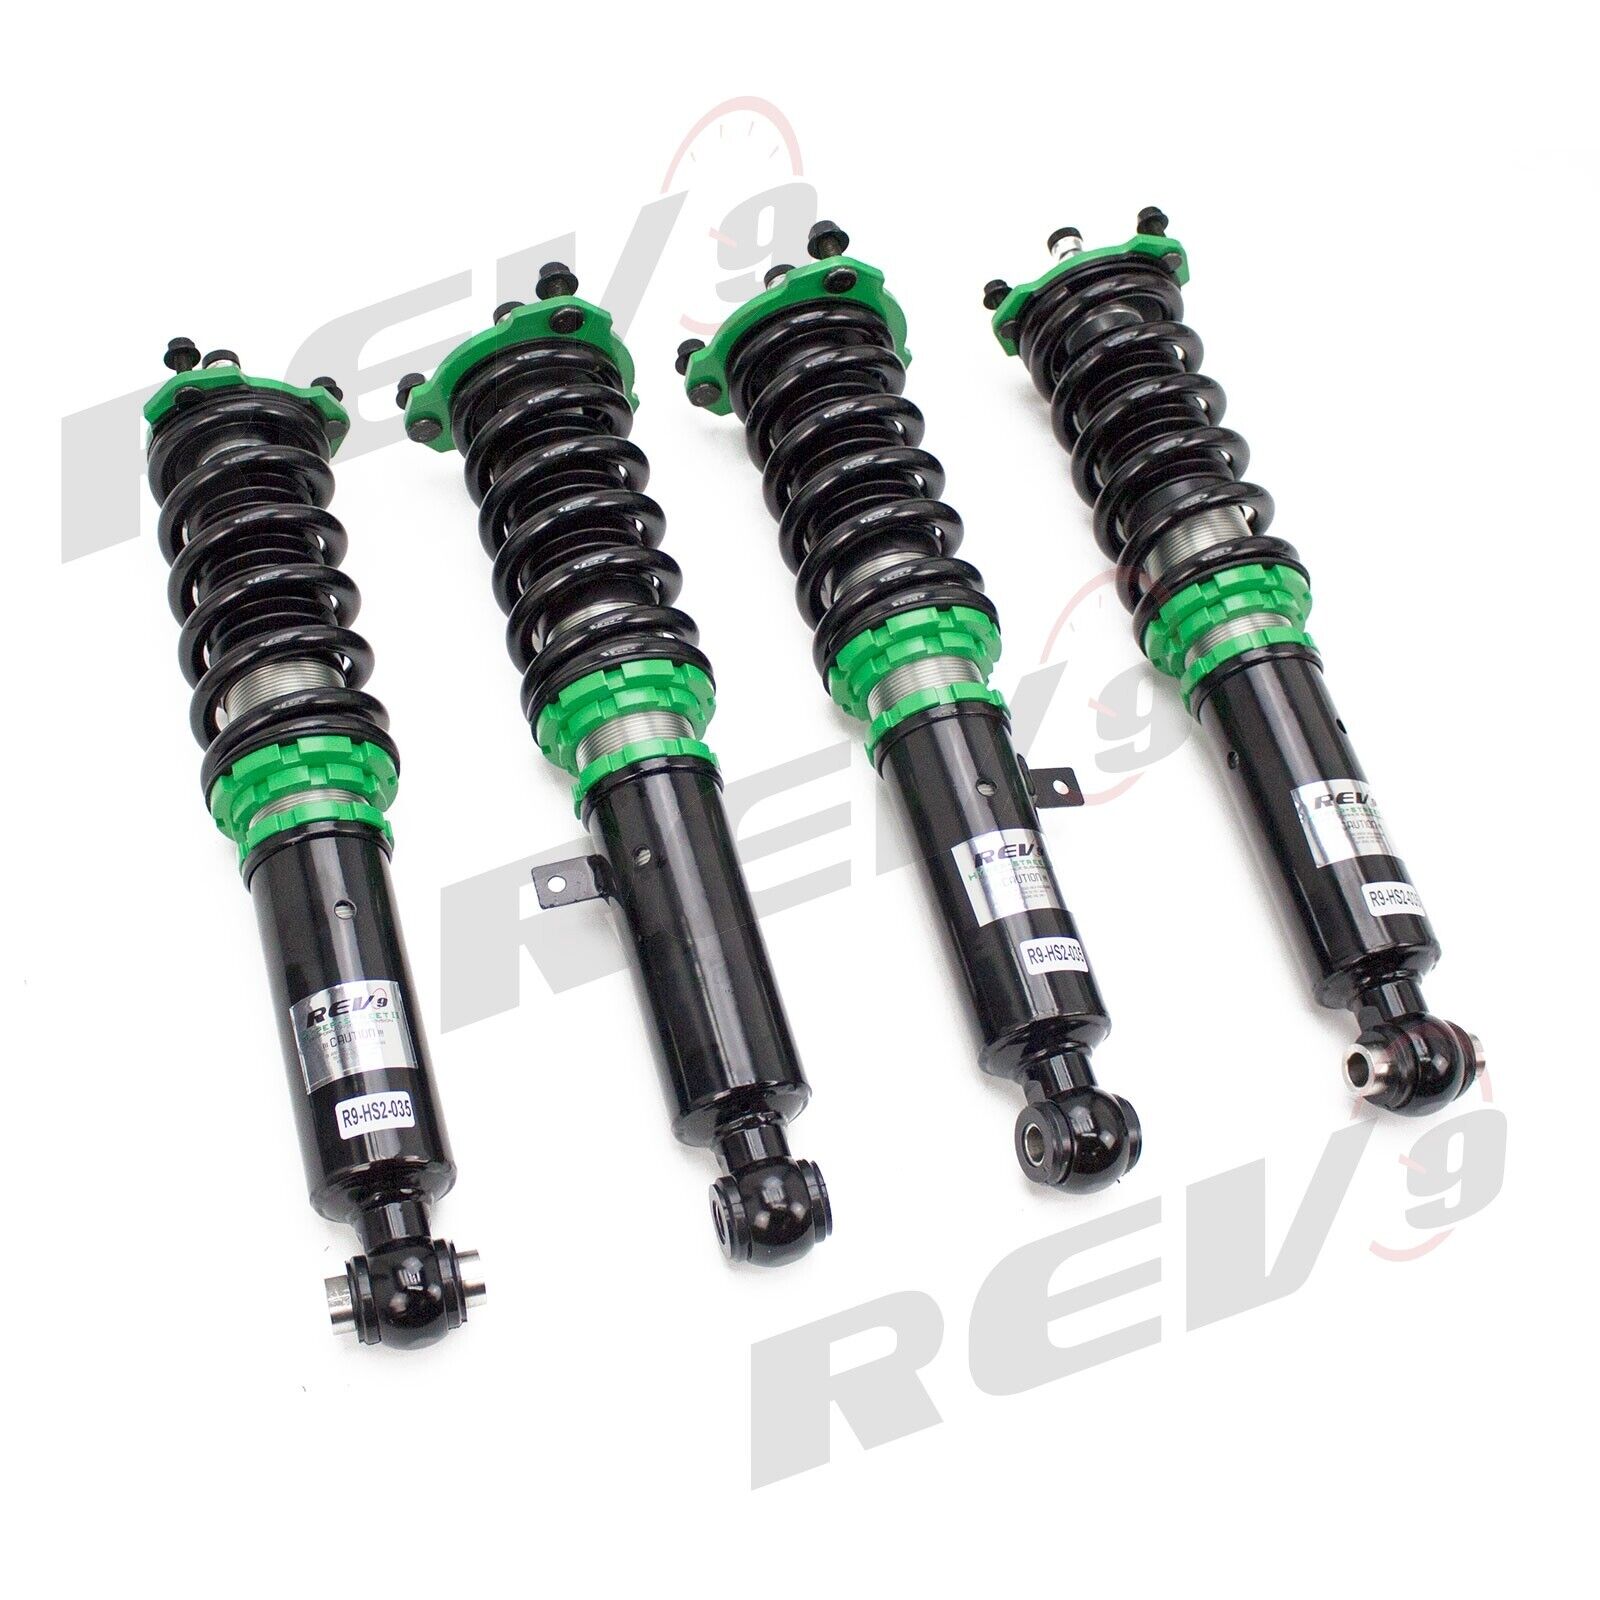 Rev9 Power Hyper Street 2 Coilovers Suspension for Lexus IS250 IS350 RWD 06-13